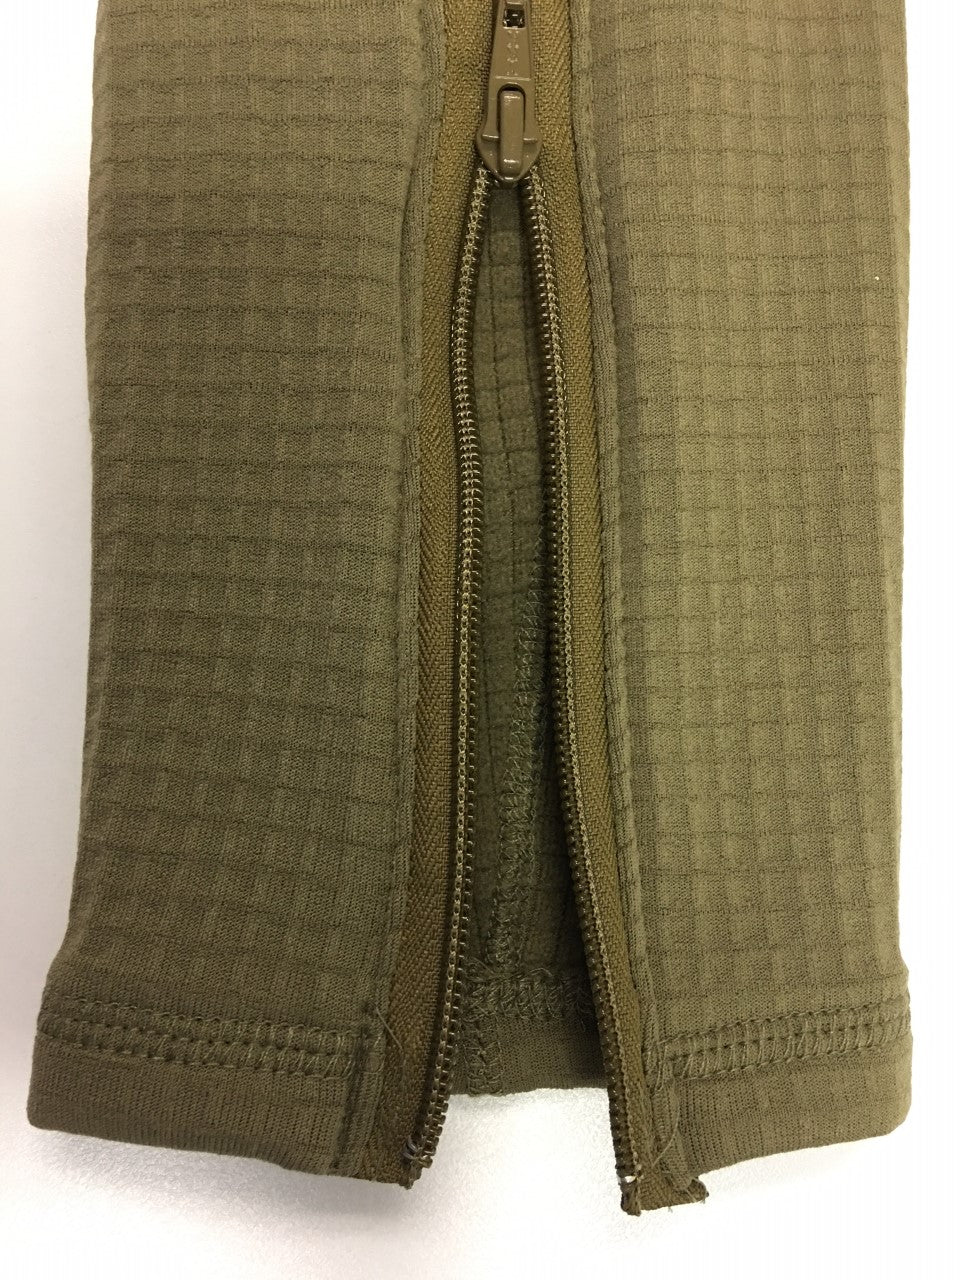 Tearaway Zipper E.C.W.C.S. Generation III Mid-Weight Bottoms – Troops  Military Supply